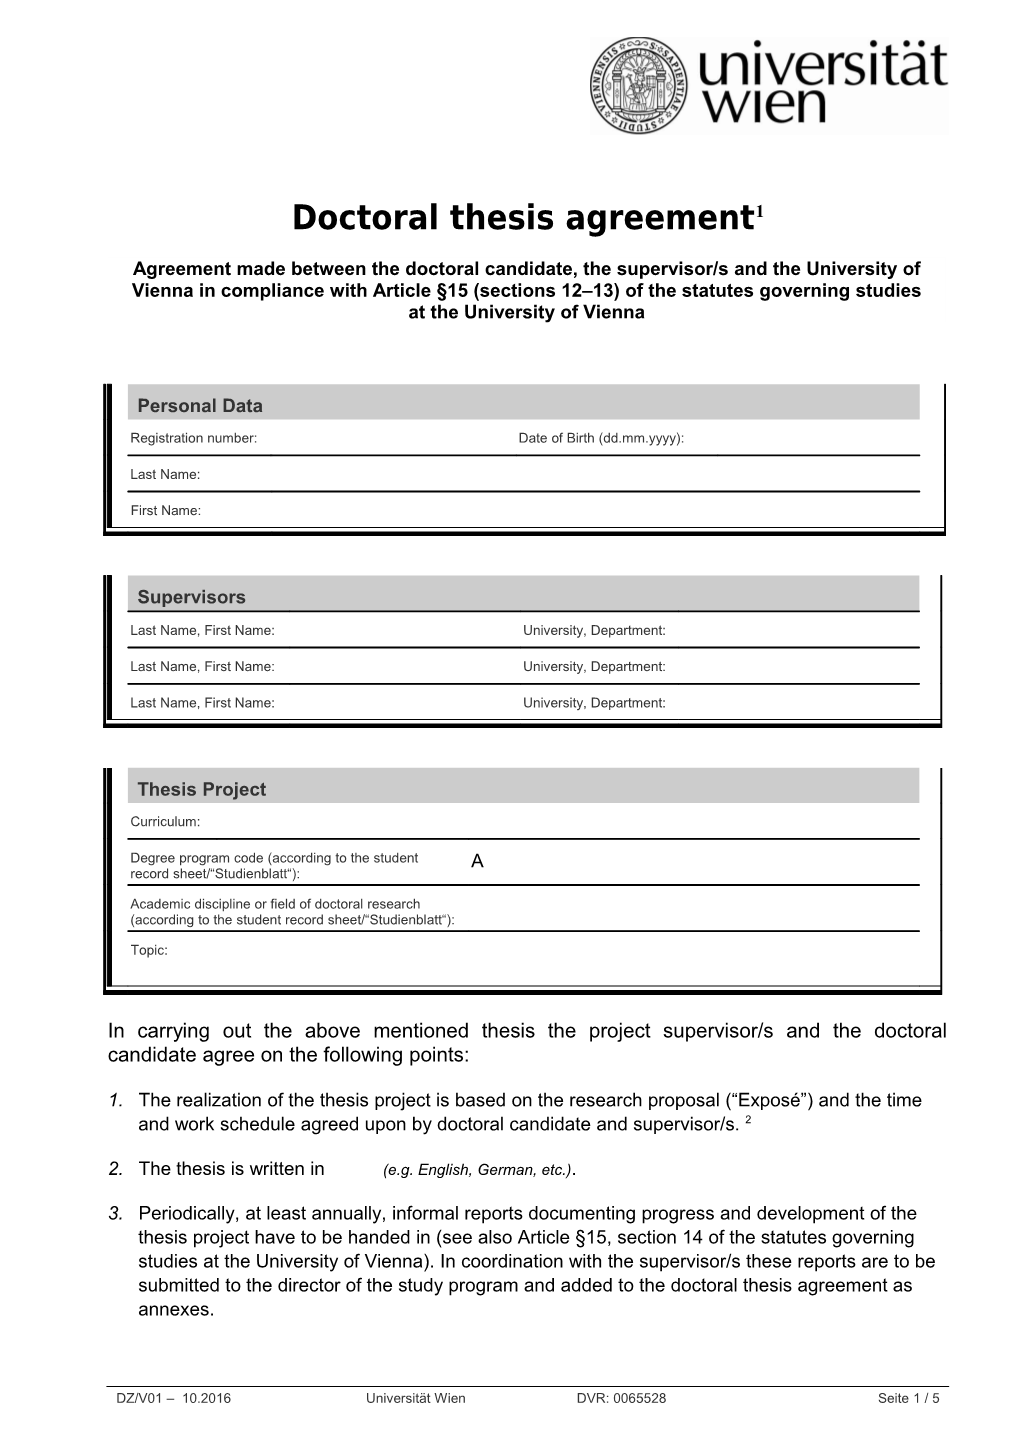 Doctoral Thesis Agreement 1